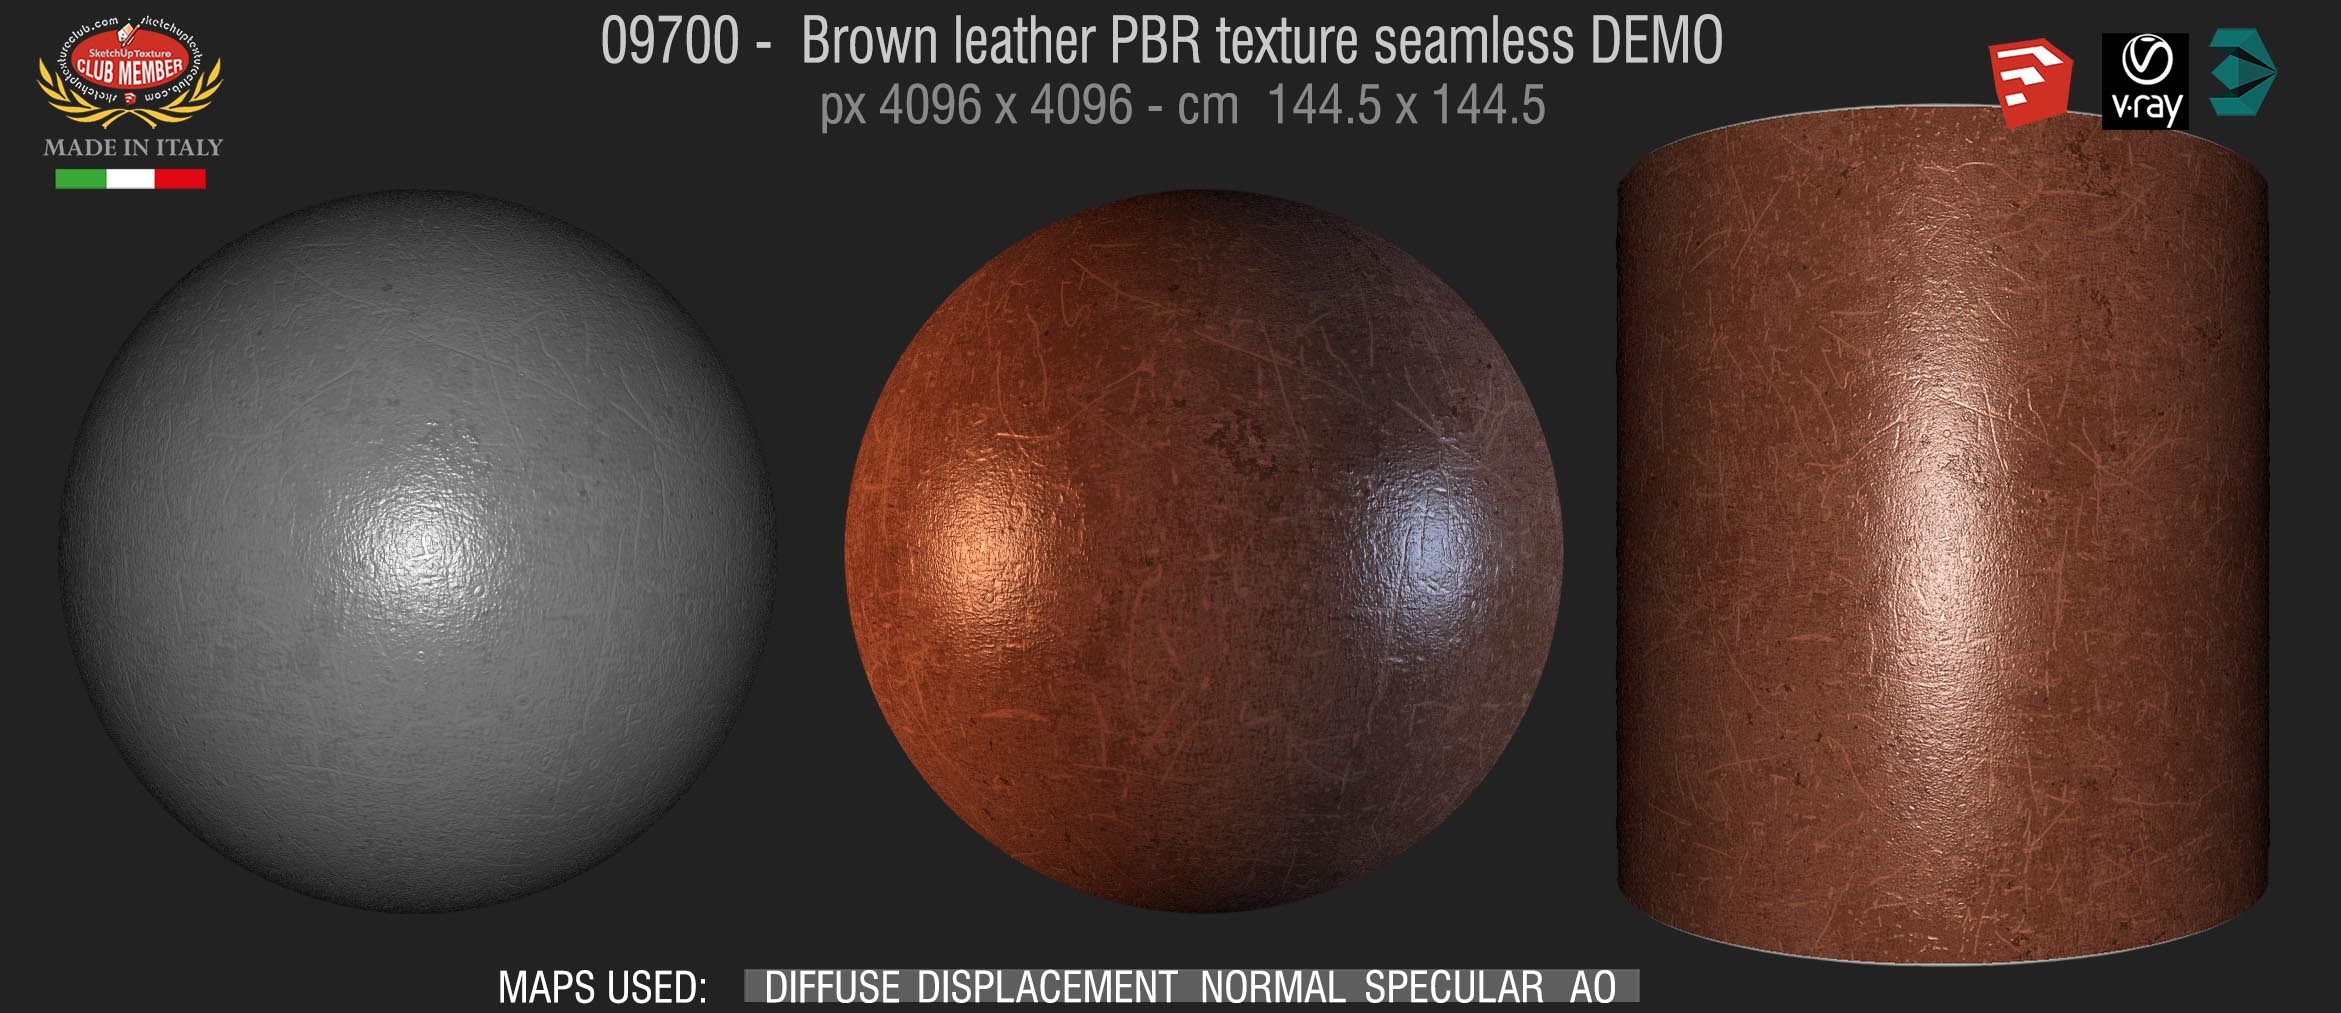 09700 Brown leather PBR texture seamless DEMO